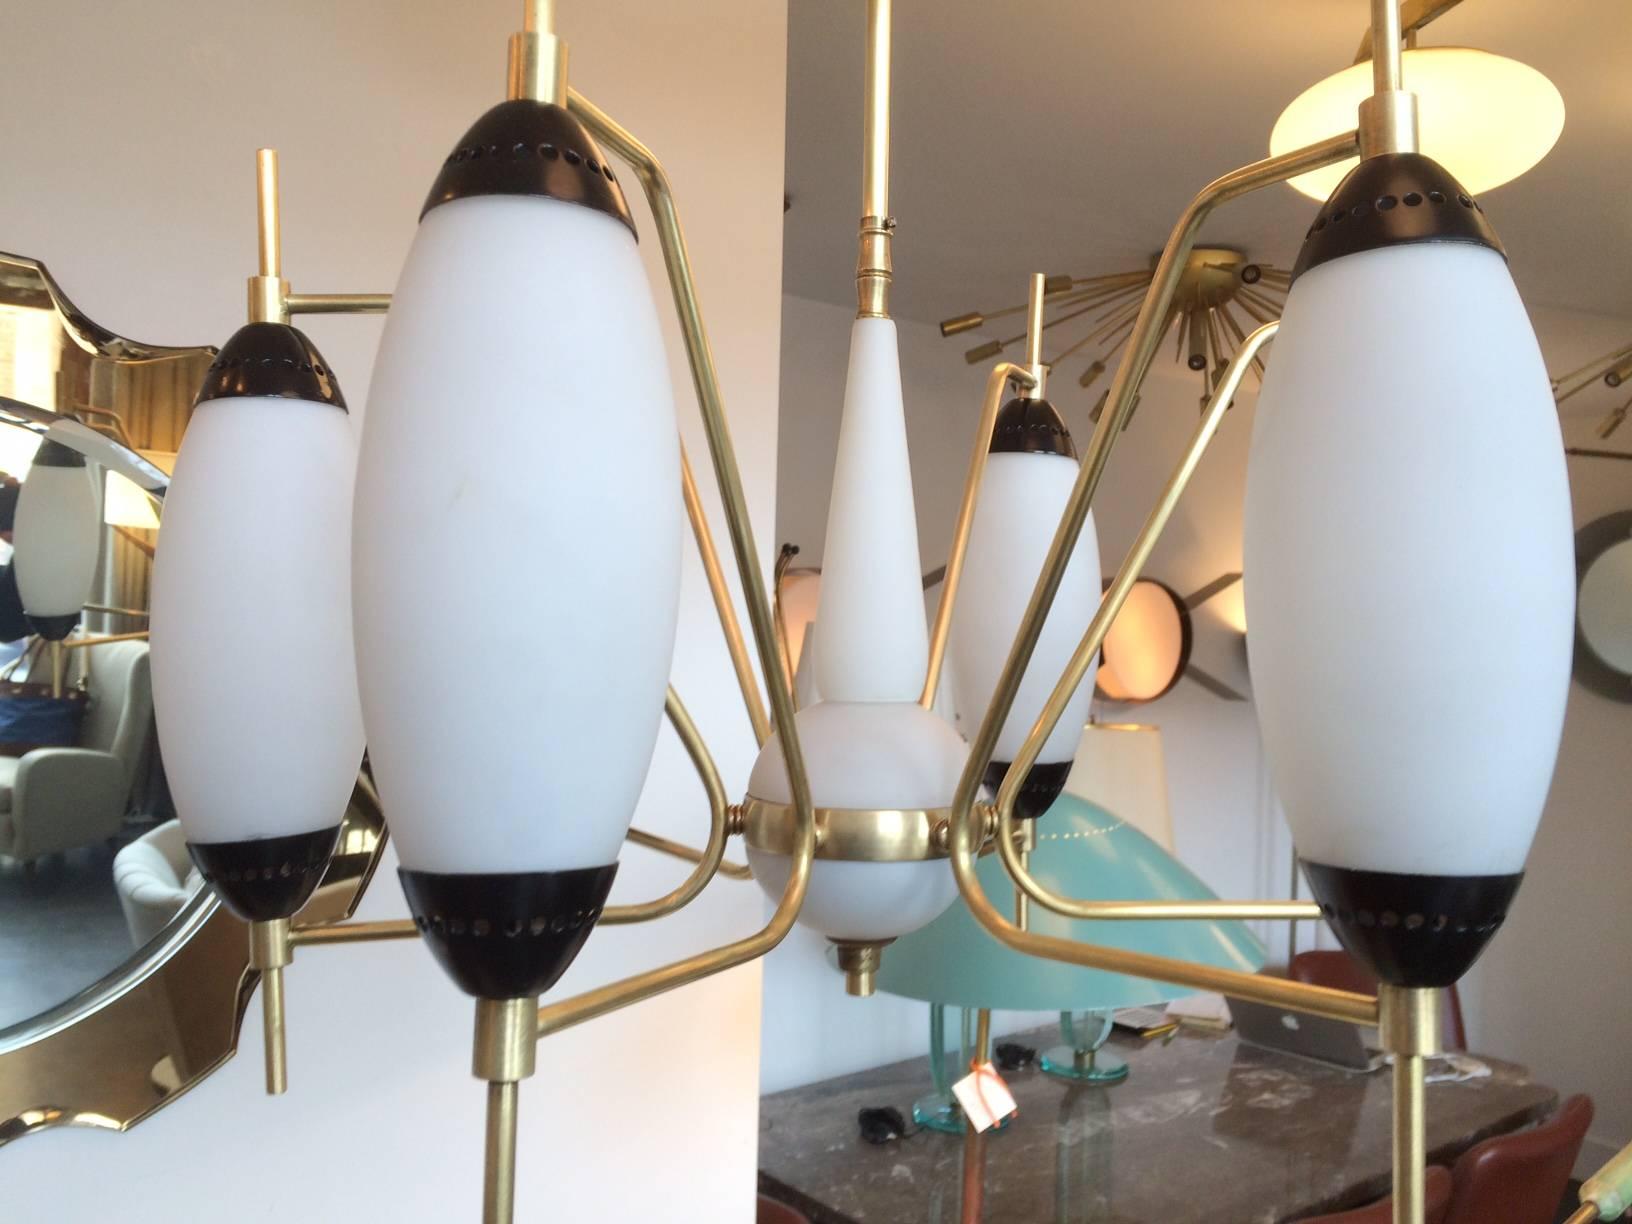 Beautiful brass armatures hold six handblown ellipse shaped white glass shades with black enameled details. Center ball is also white glass and handblown.